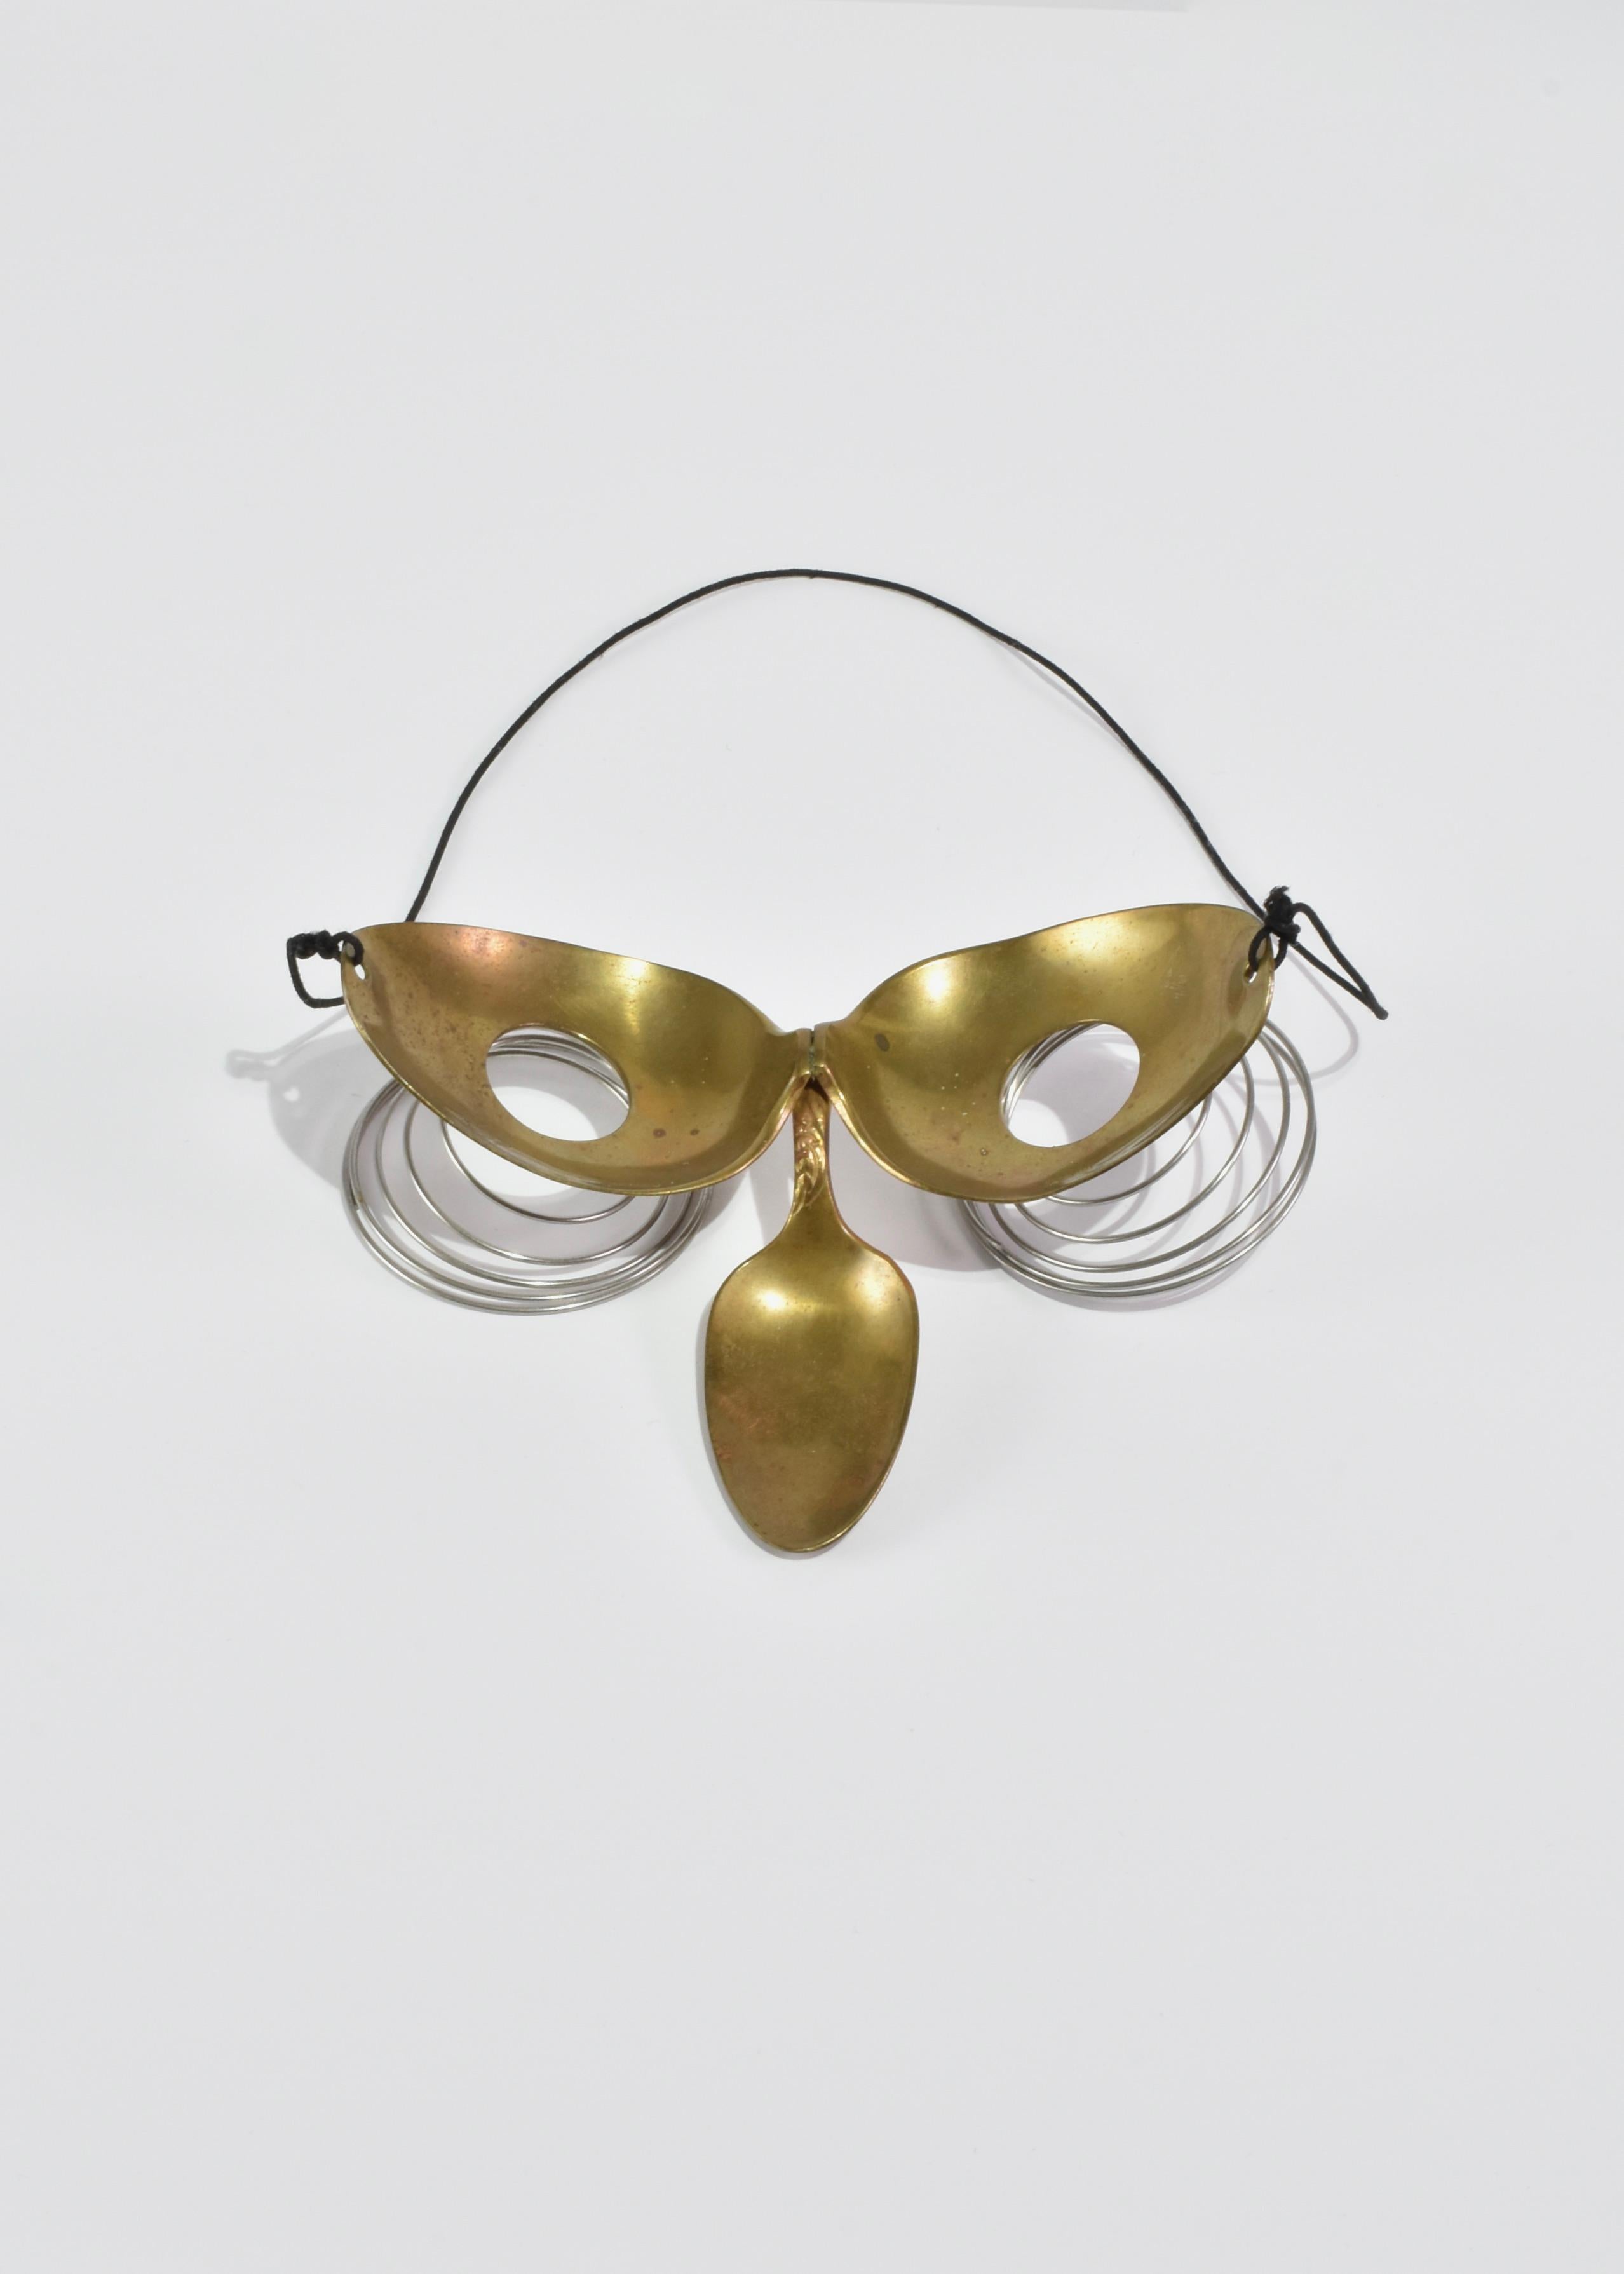 Hand-Crafted Spoonman Mask For Sale